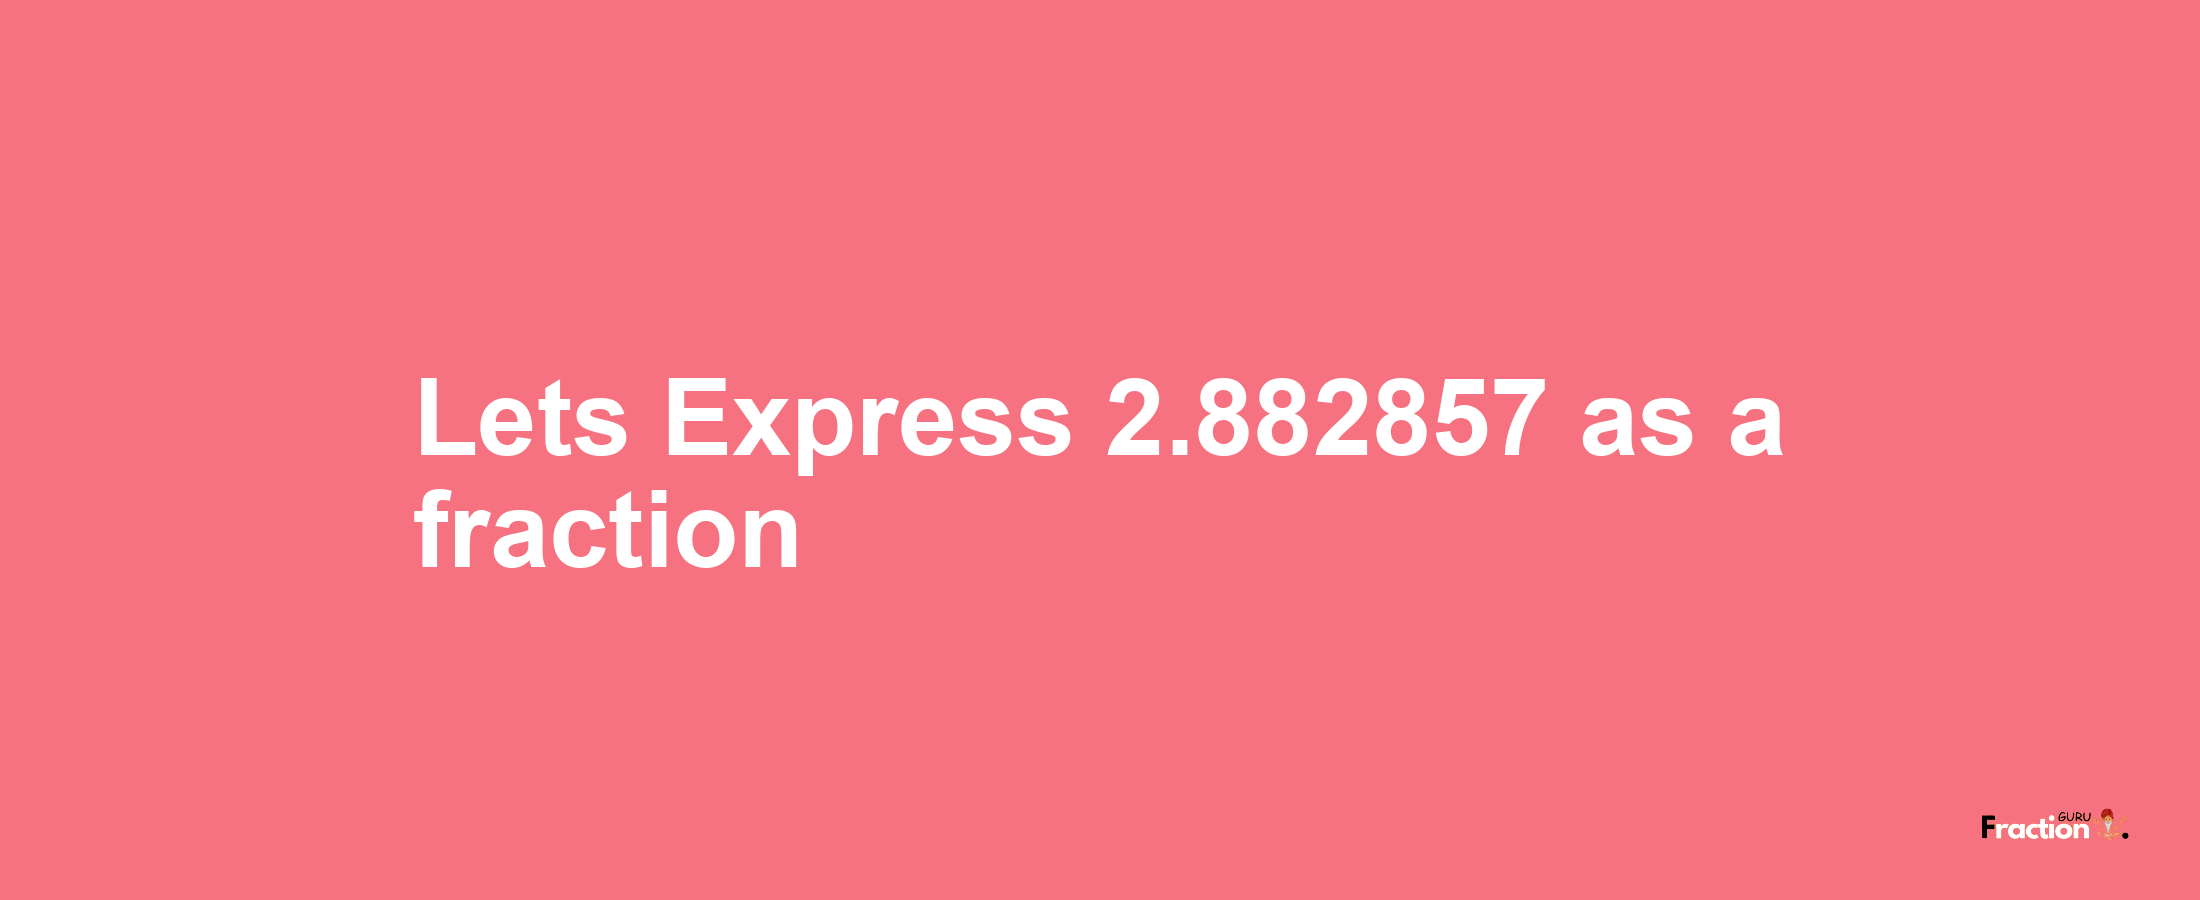 Lets Express 2.882857 as afraction